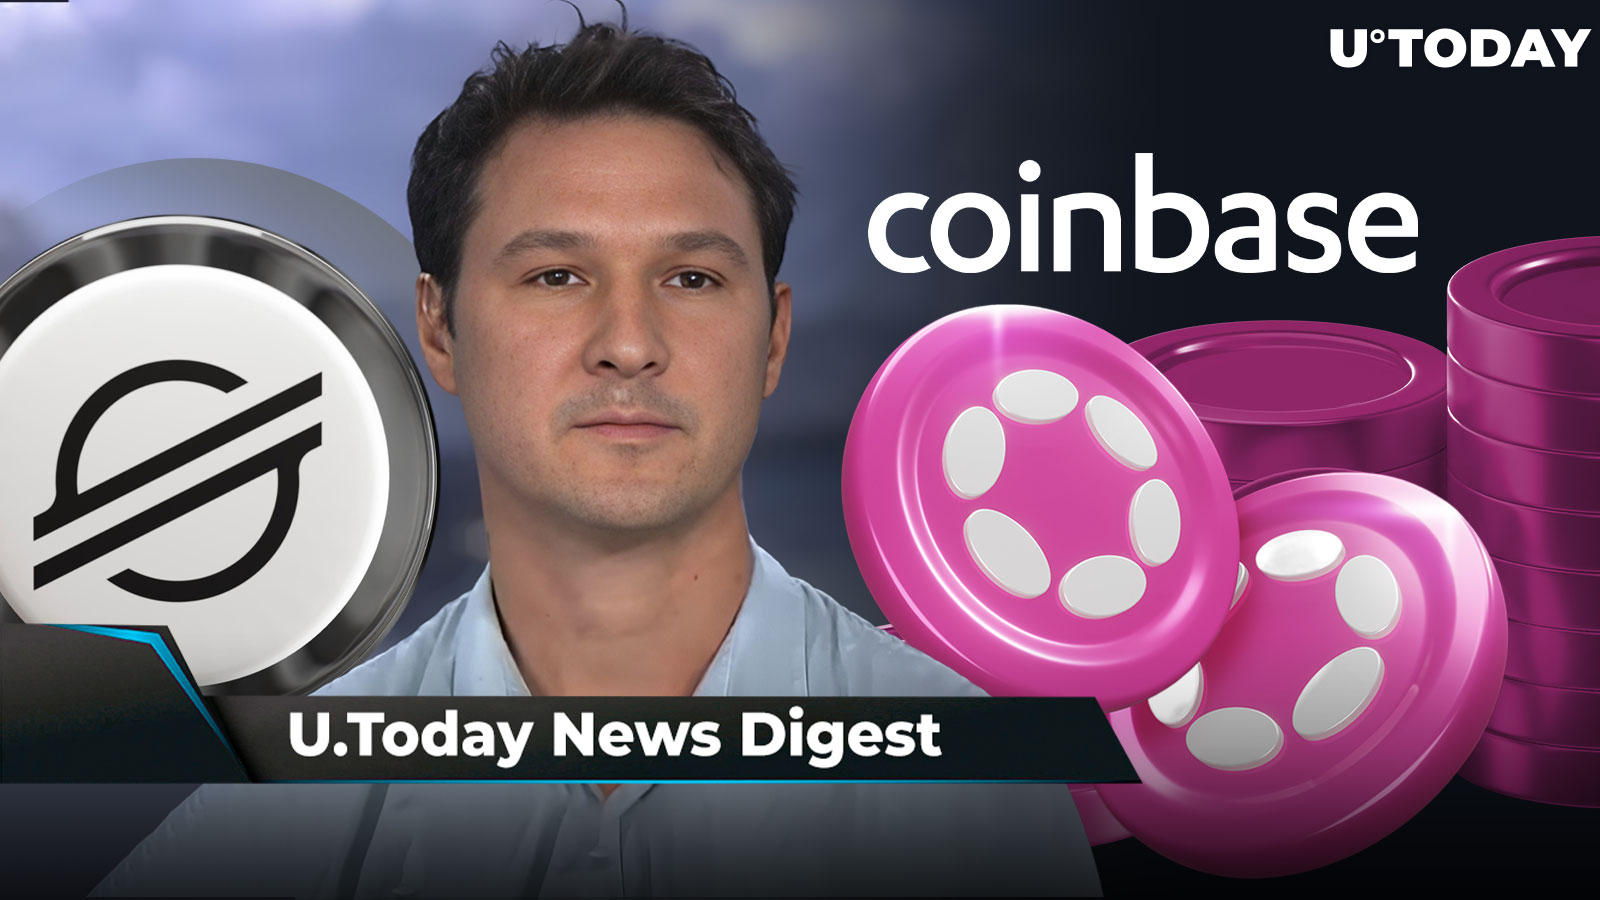 Ripple Cofounder Celebrates Major Stellar Success, Polkadot Secures Spot on Coinbase Futures, Shiba Inu Burn Rate Surges 8,511%: Crypto News Digest by U.Today